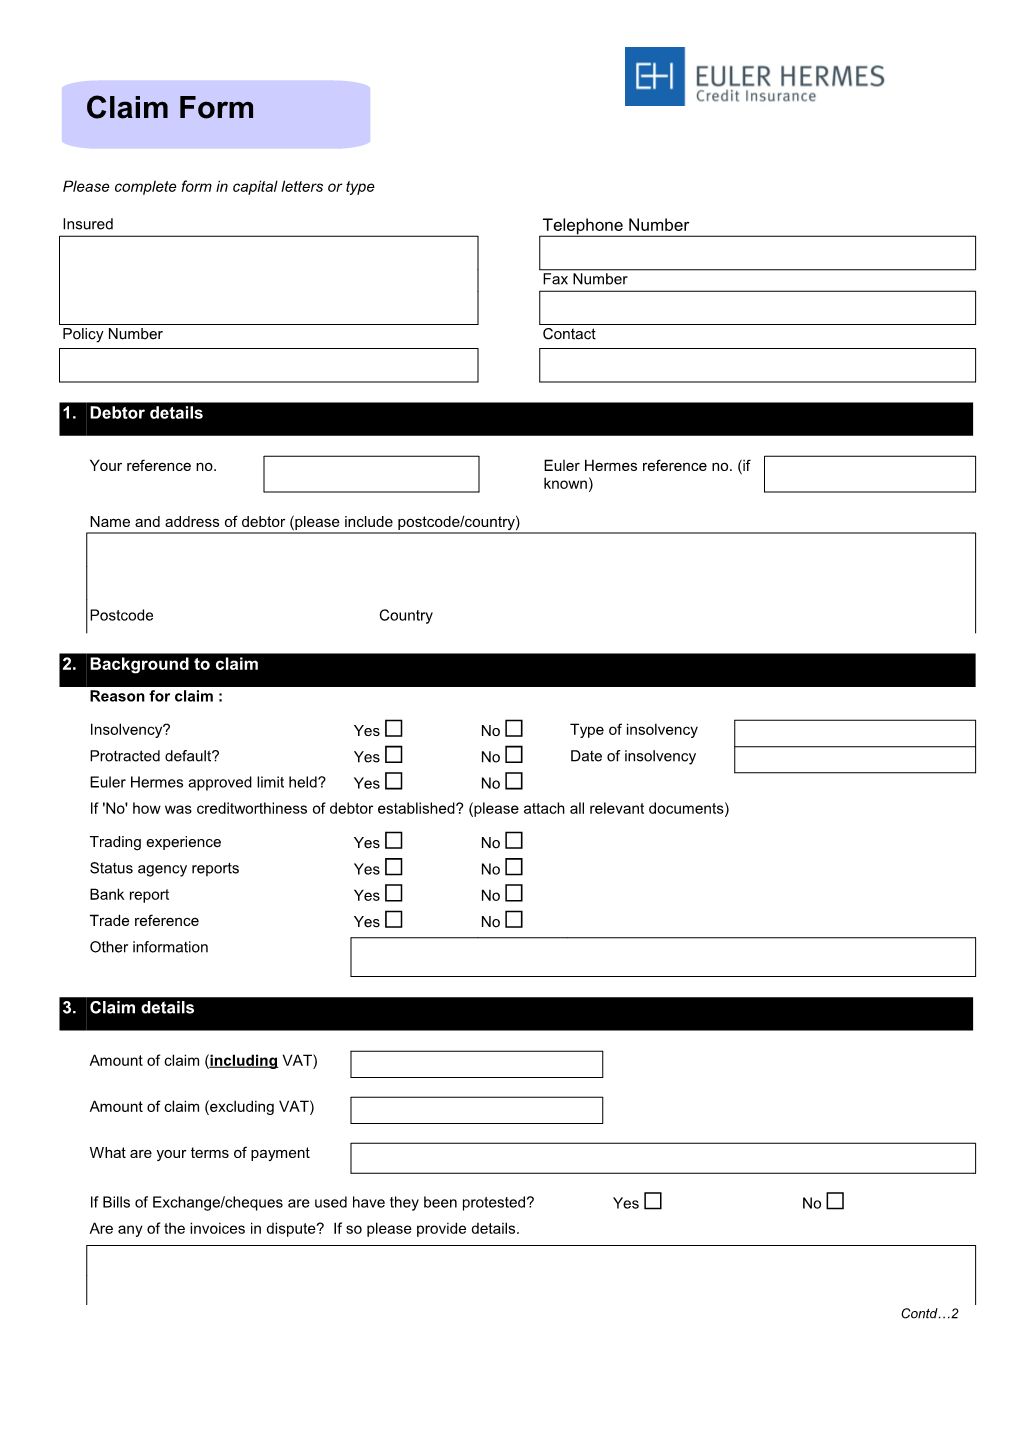 Please Complete Form in Capital Letters Or Type